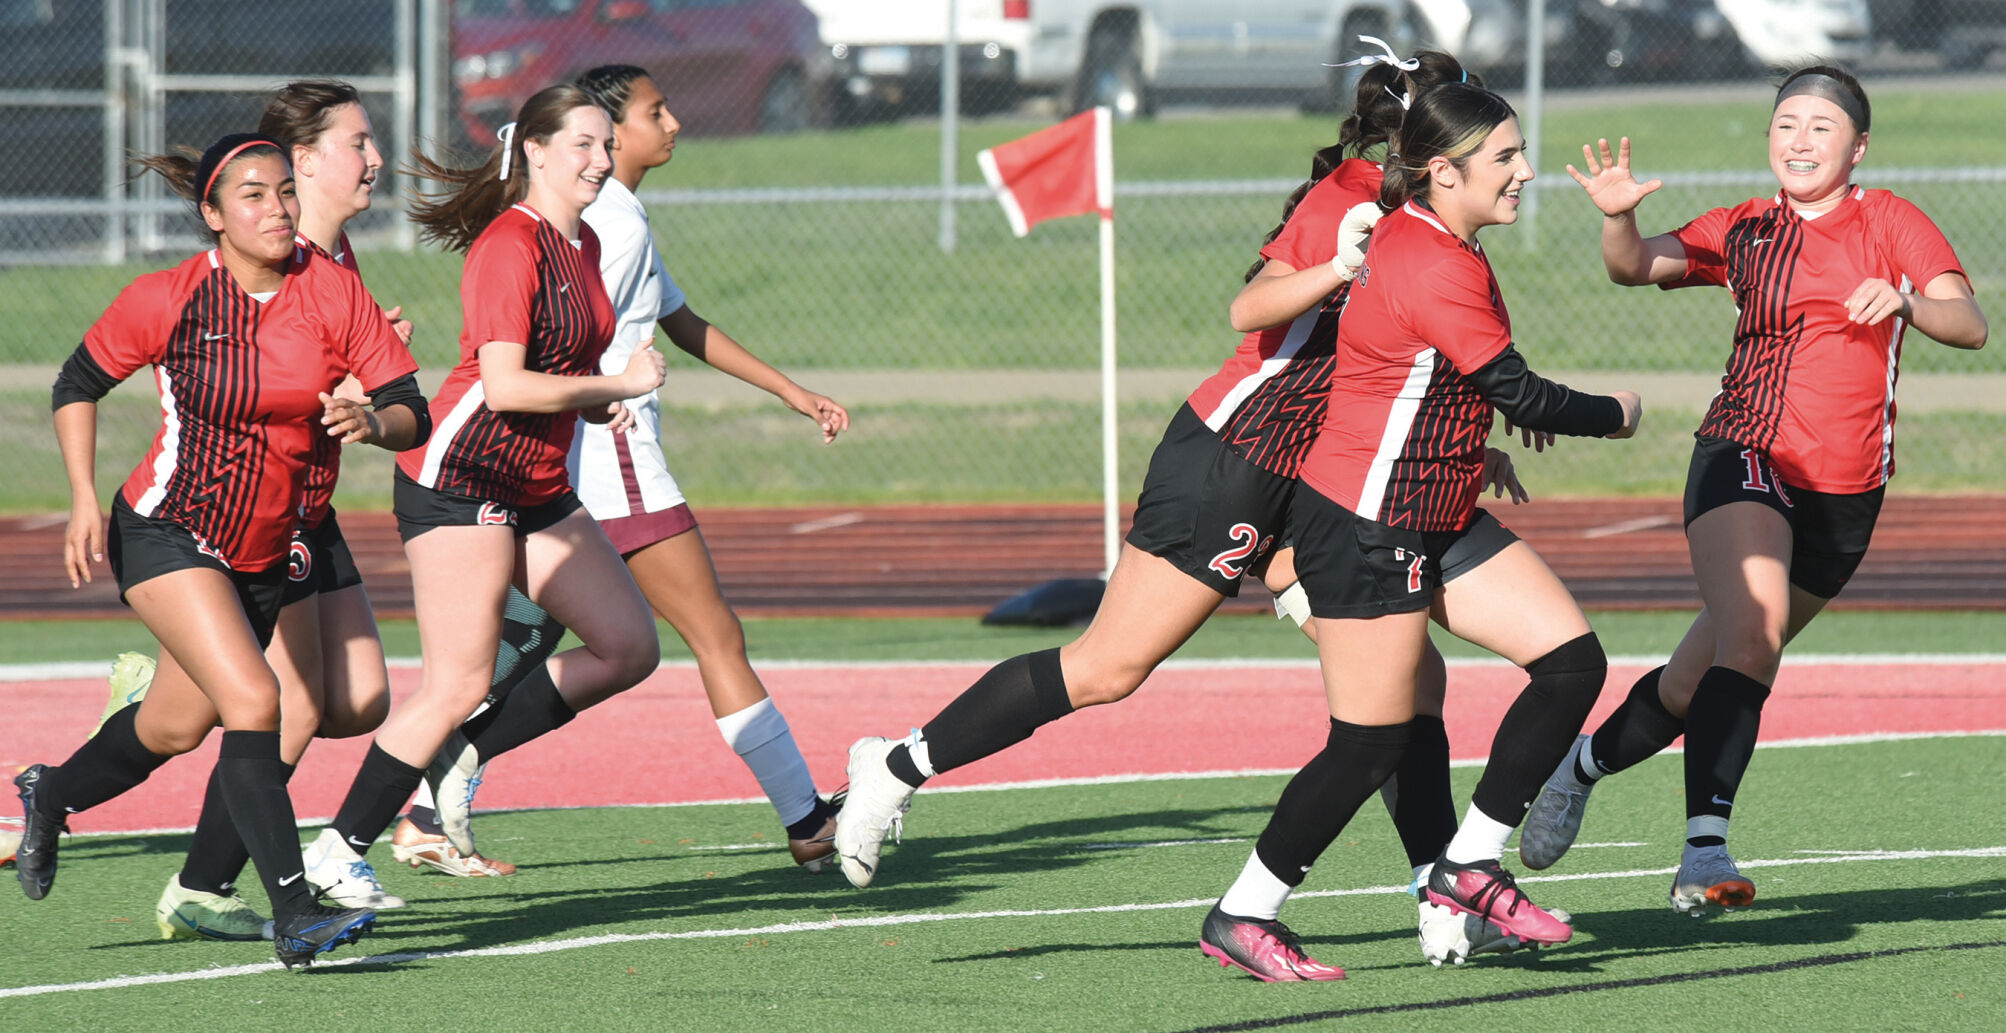 Lady Lions finish soccer season with 4-2 loss; Lions win 6-3